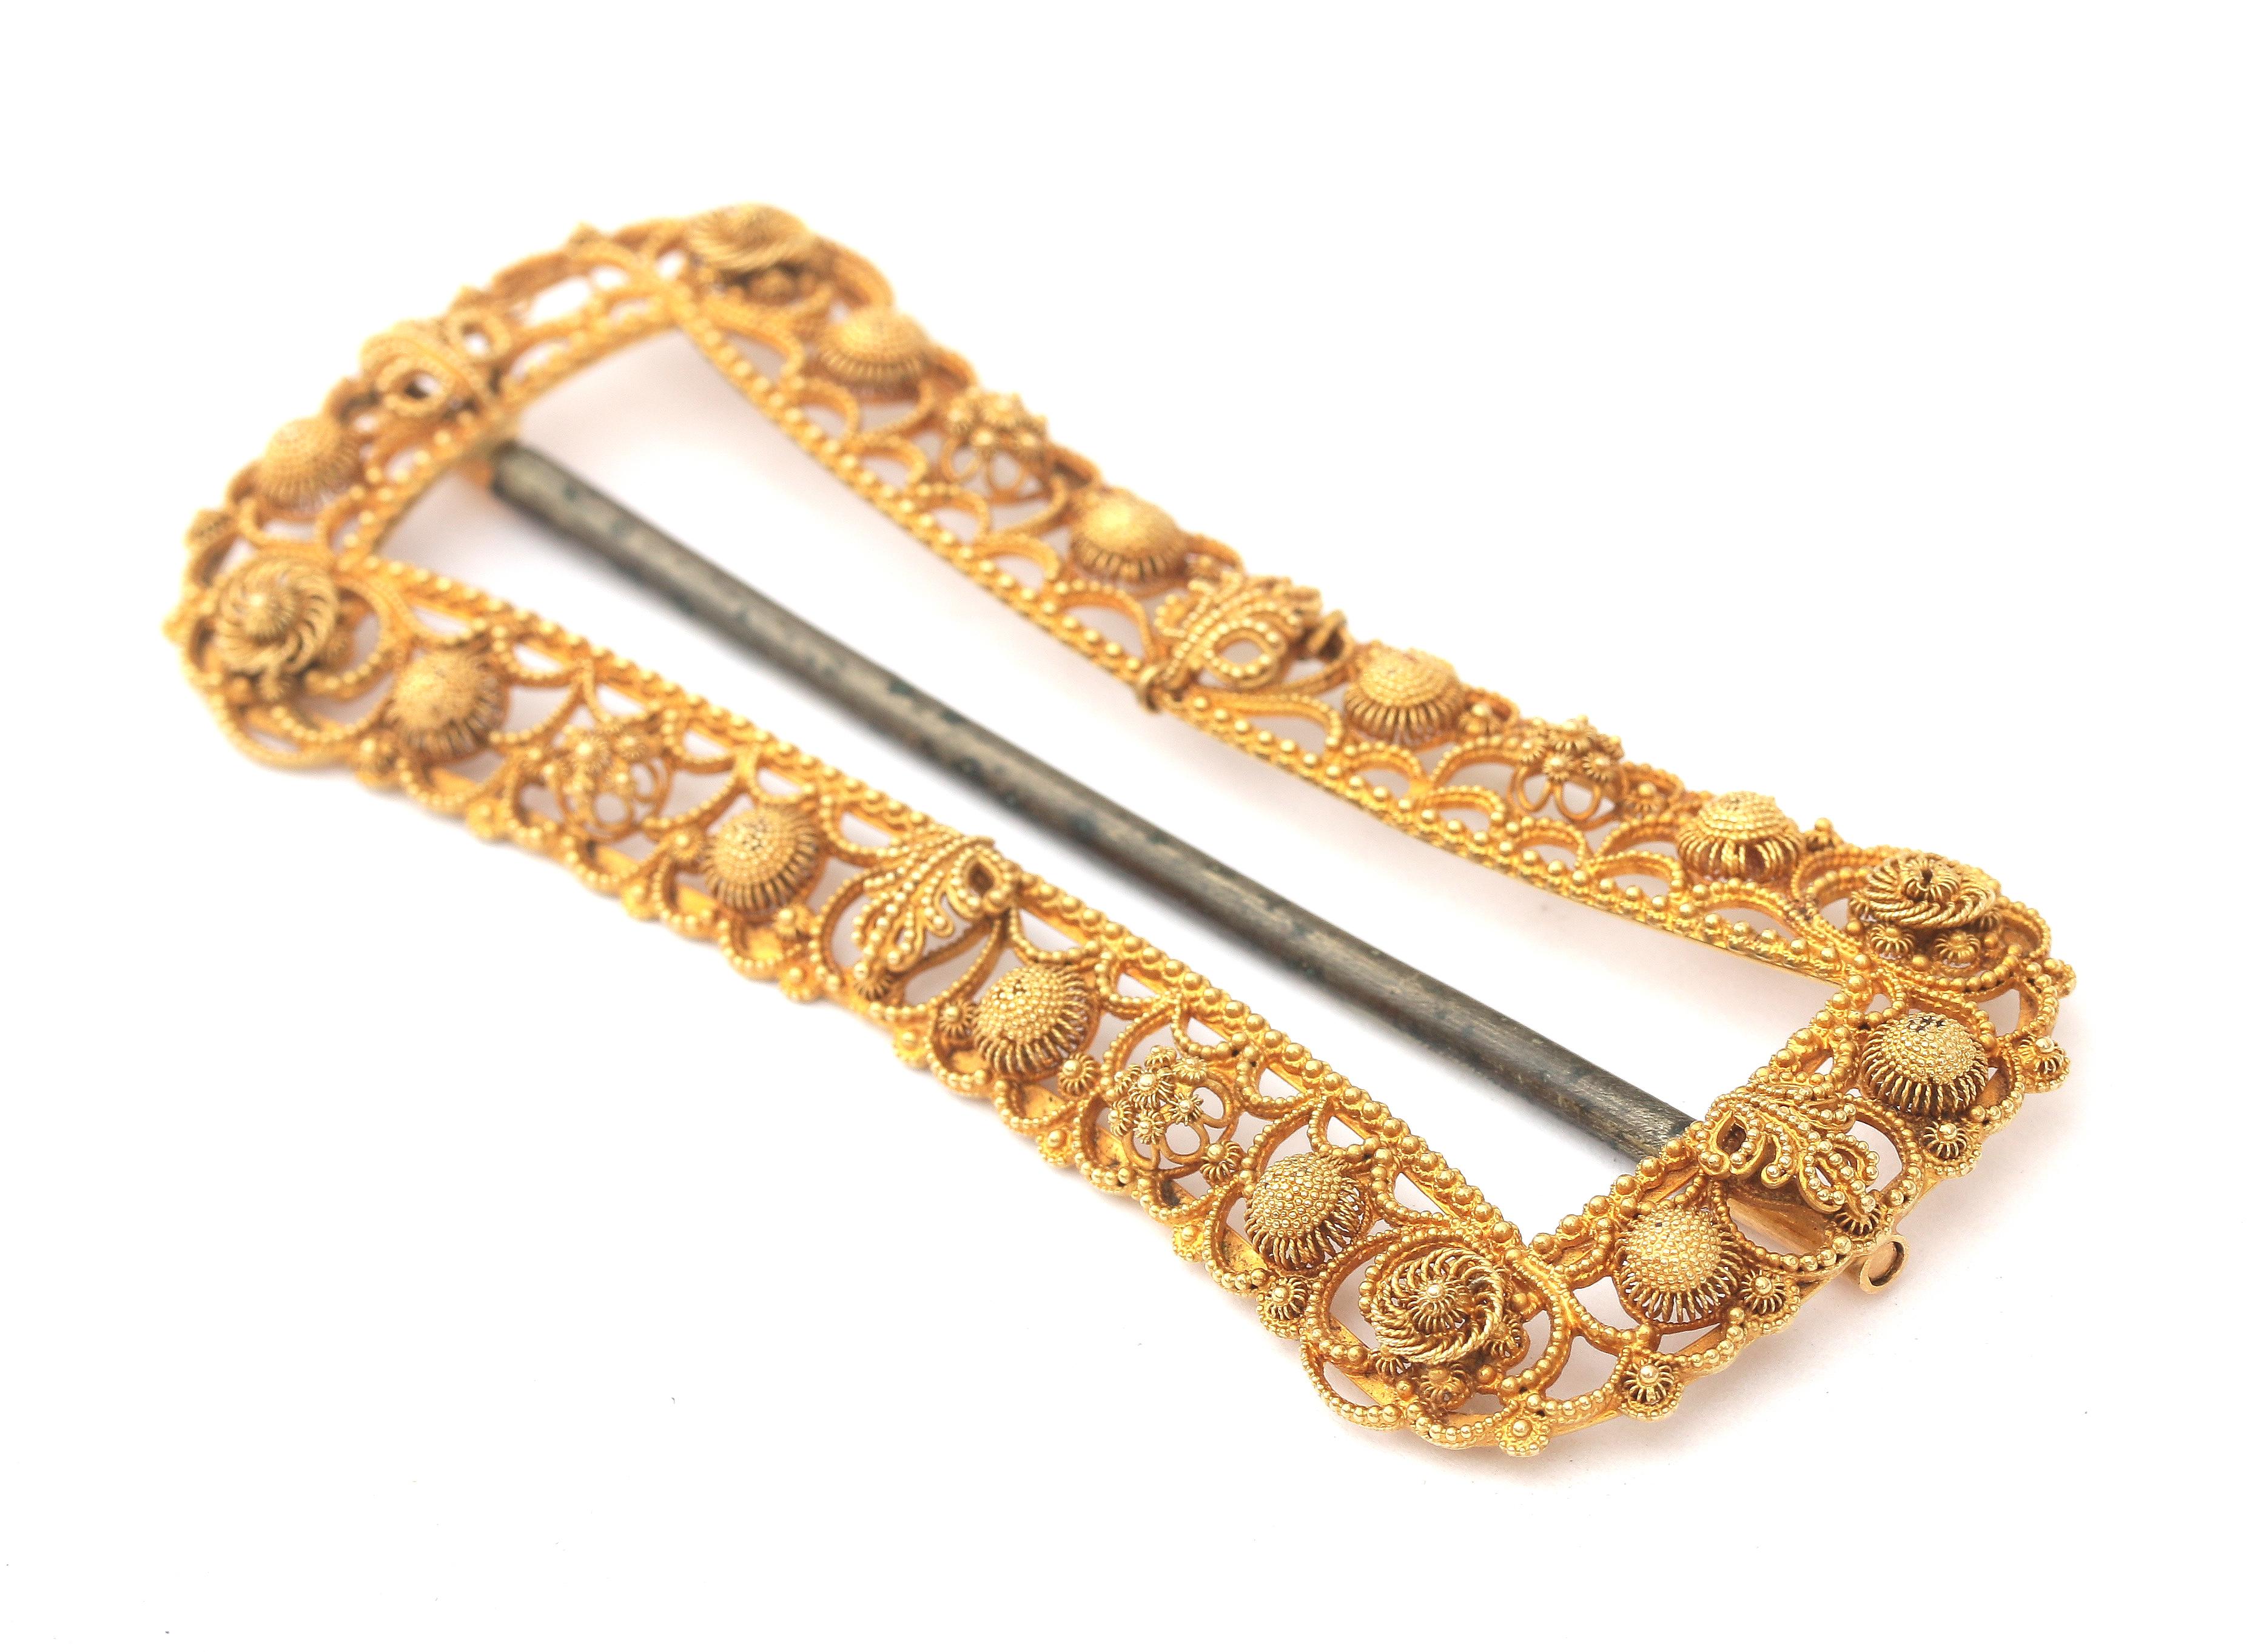 An 18 karat gold cannetille buckle, end of the nineteenth century - Image 2 of 4